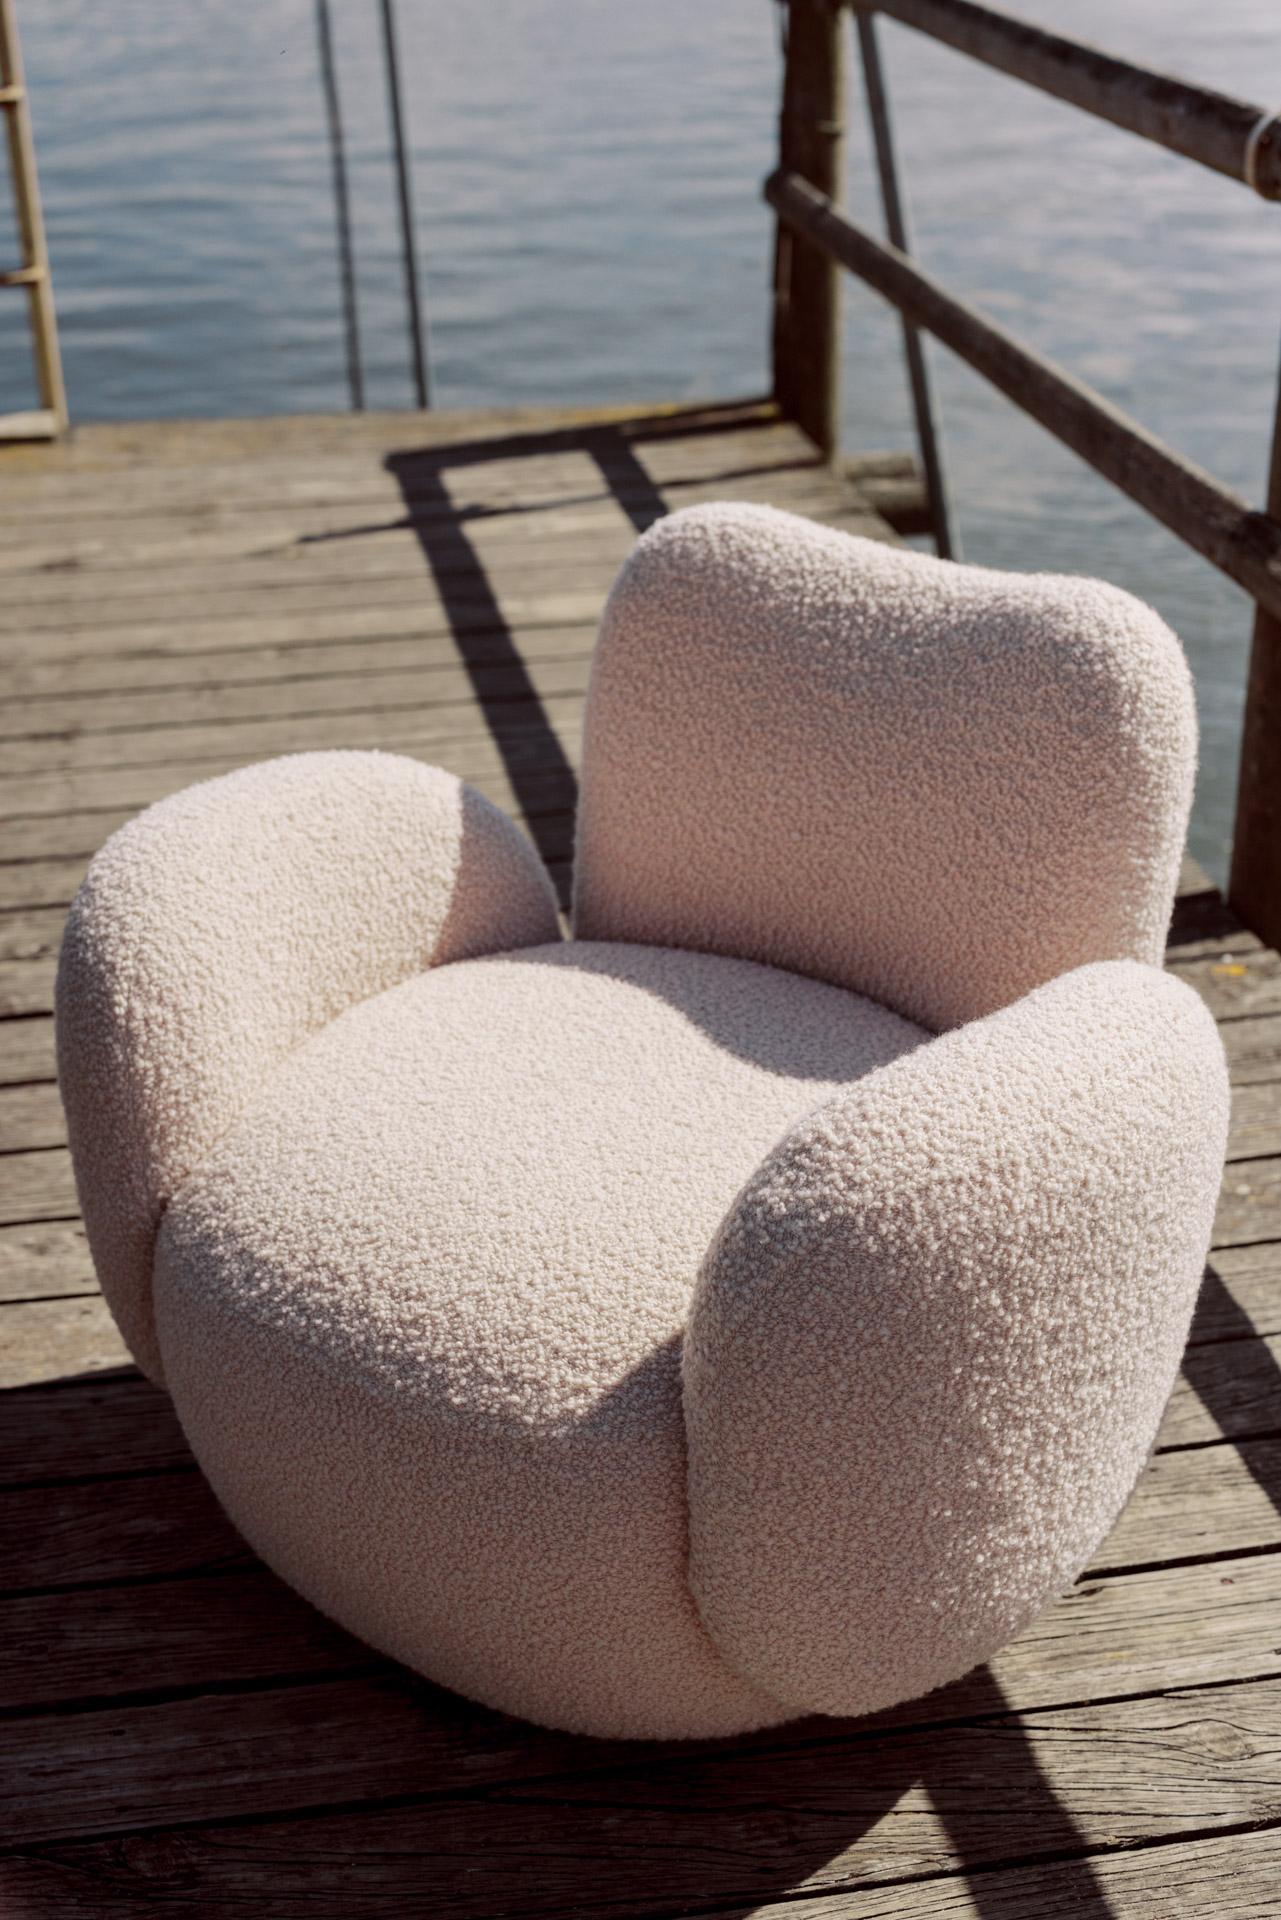 Conchula Armchair, Contemporary Collection, Handcrafted in Portugal - Europe by Greenapple.

Designed by Rute Martins for the Contemporary Collection, with its eye-catching and curvaceous silhouette, Conchula is a room-defining armchair with rounded